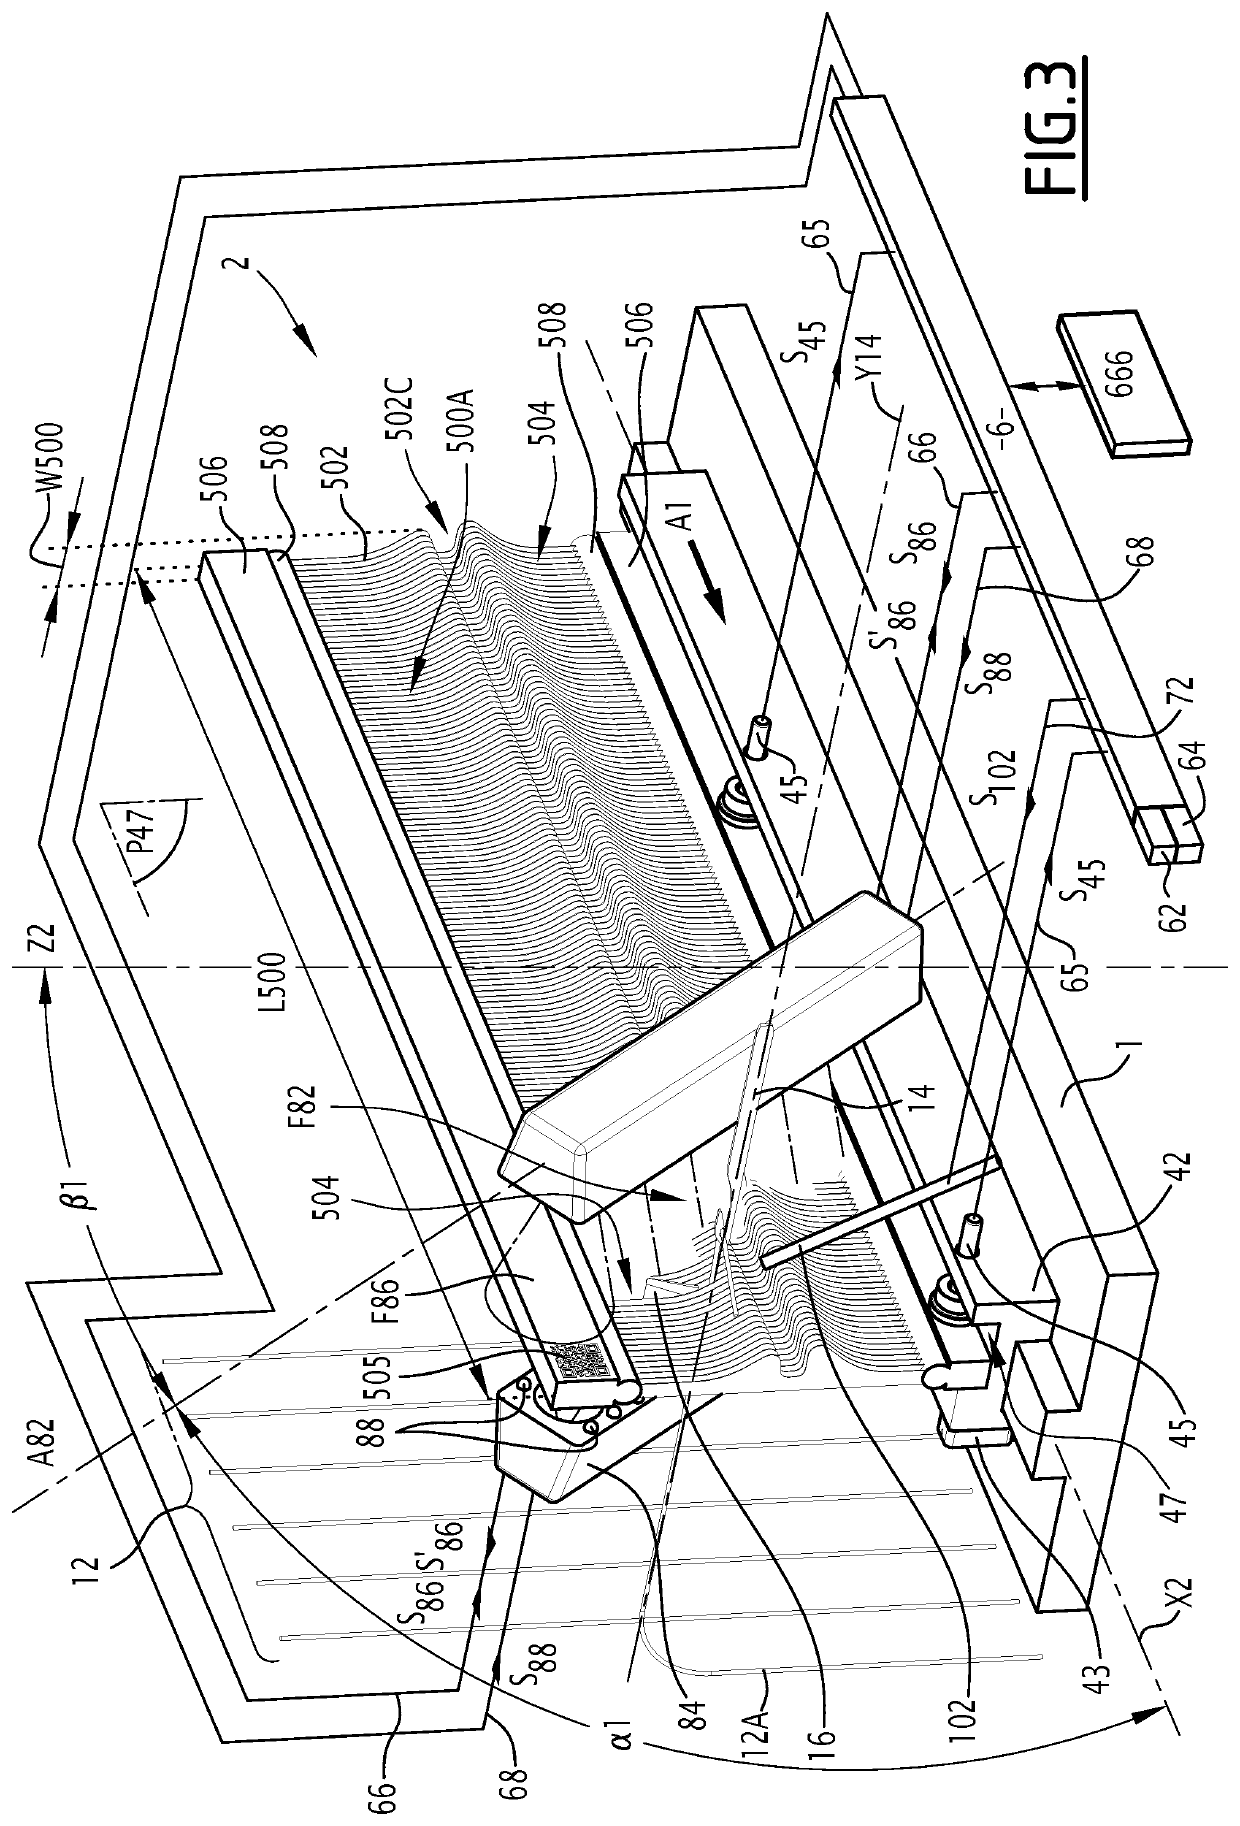 Reed monitoring assembly, drawing-in machine incorporating such a reed monitoring assembly and process for monitoring a reed with such a reed monitoring assembly